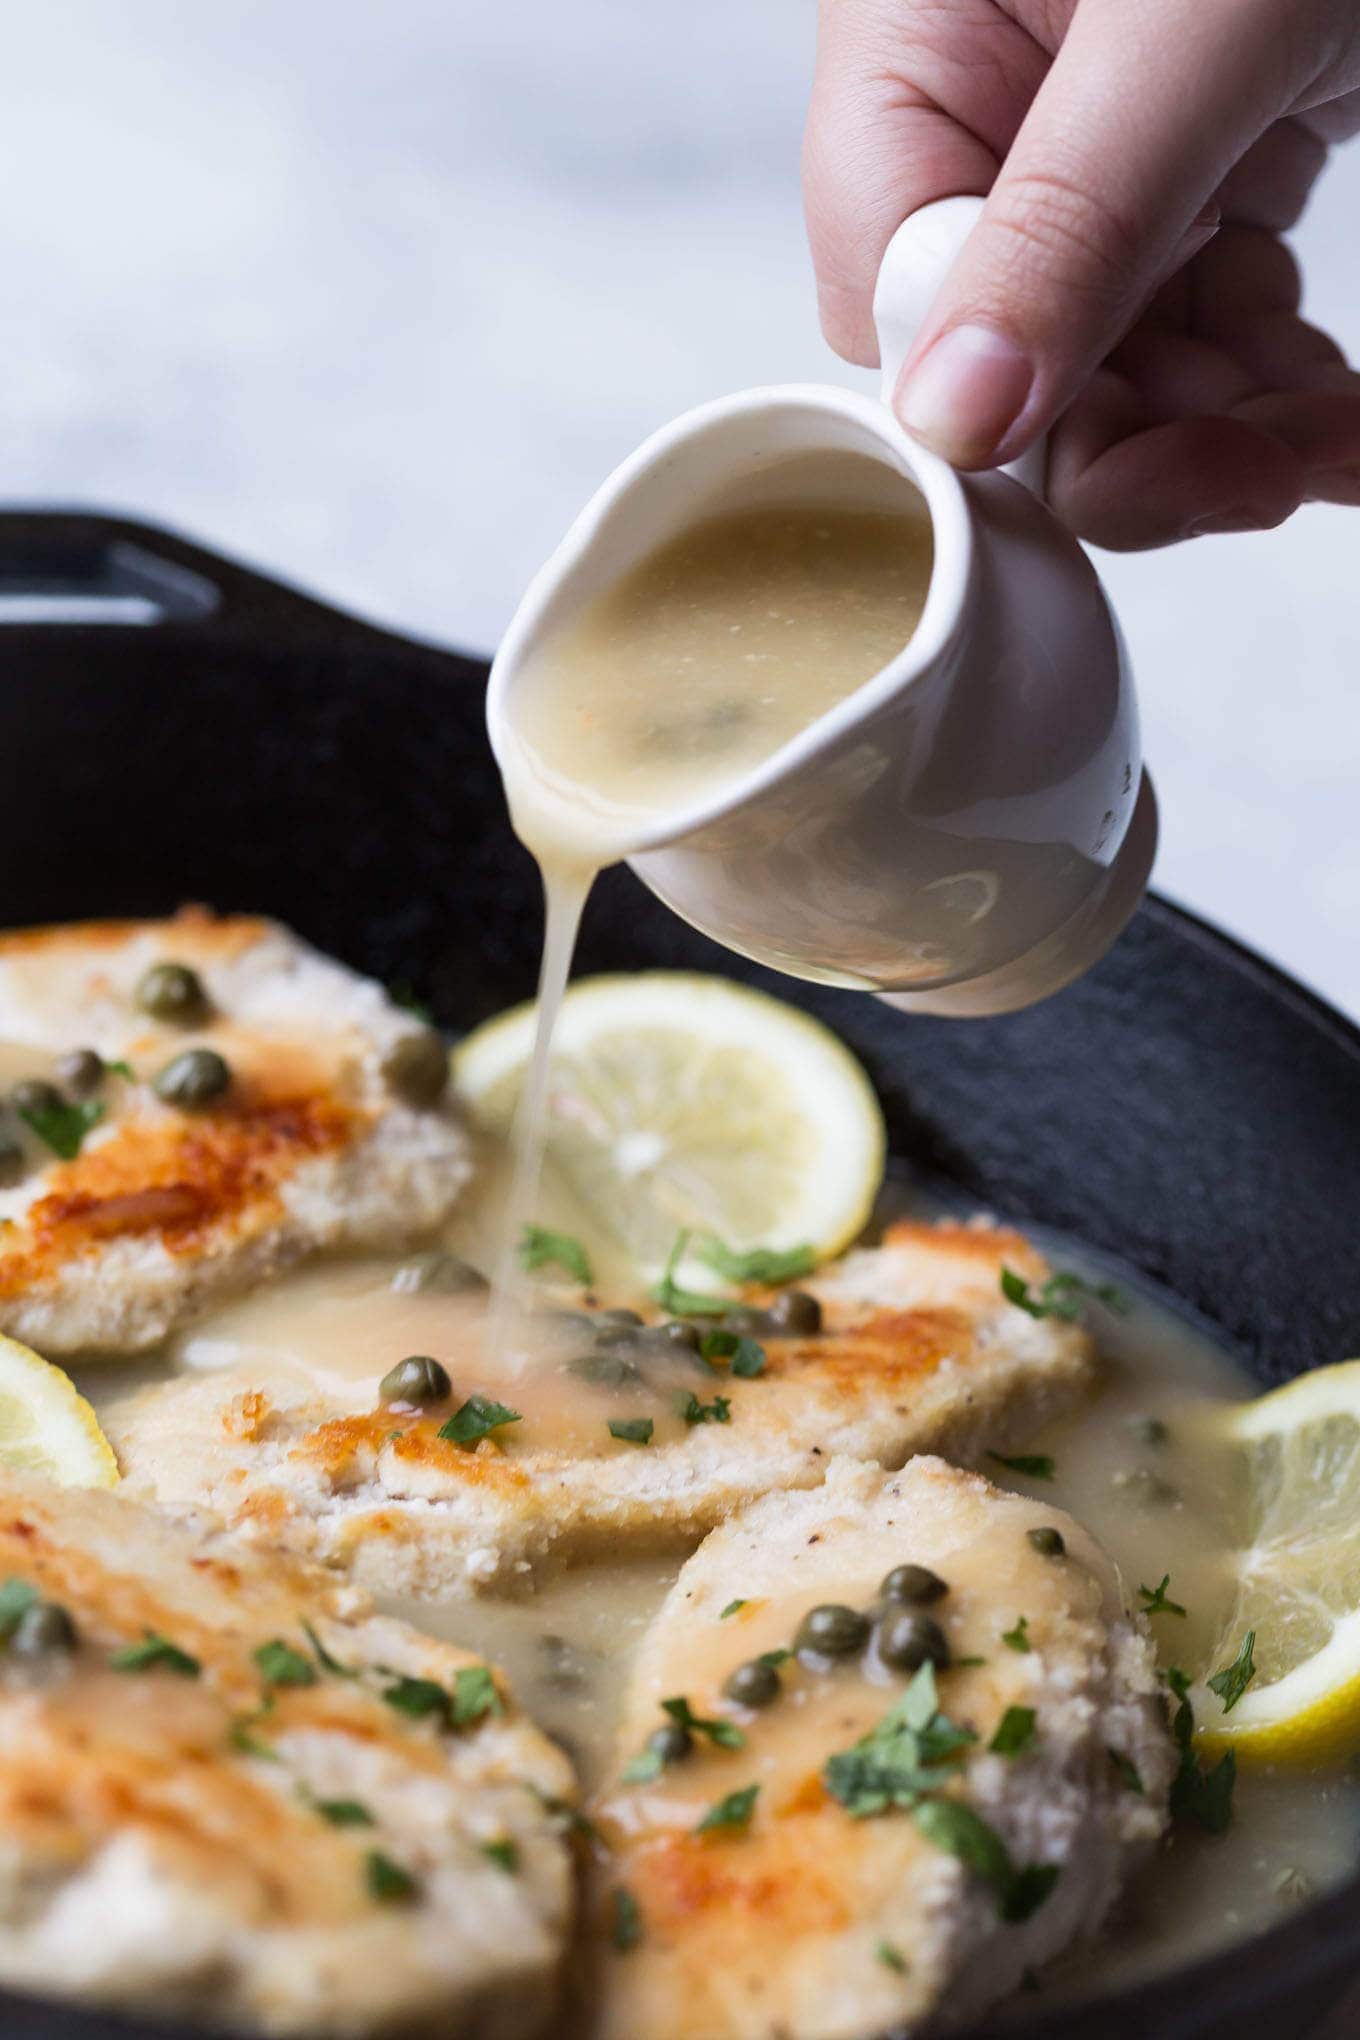 Easy Weeknight Whole30 Chicken Piccata,ready in less than 30 Minutes! This recipe is Paleo,Whole30, and low carb.